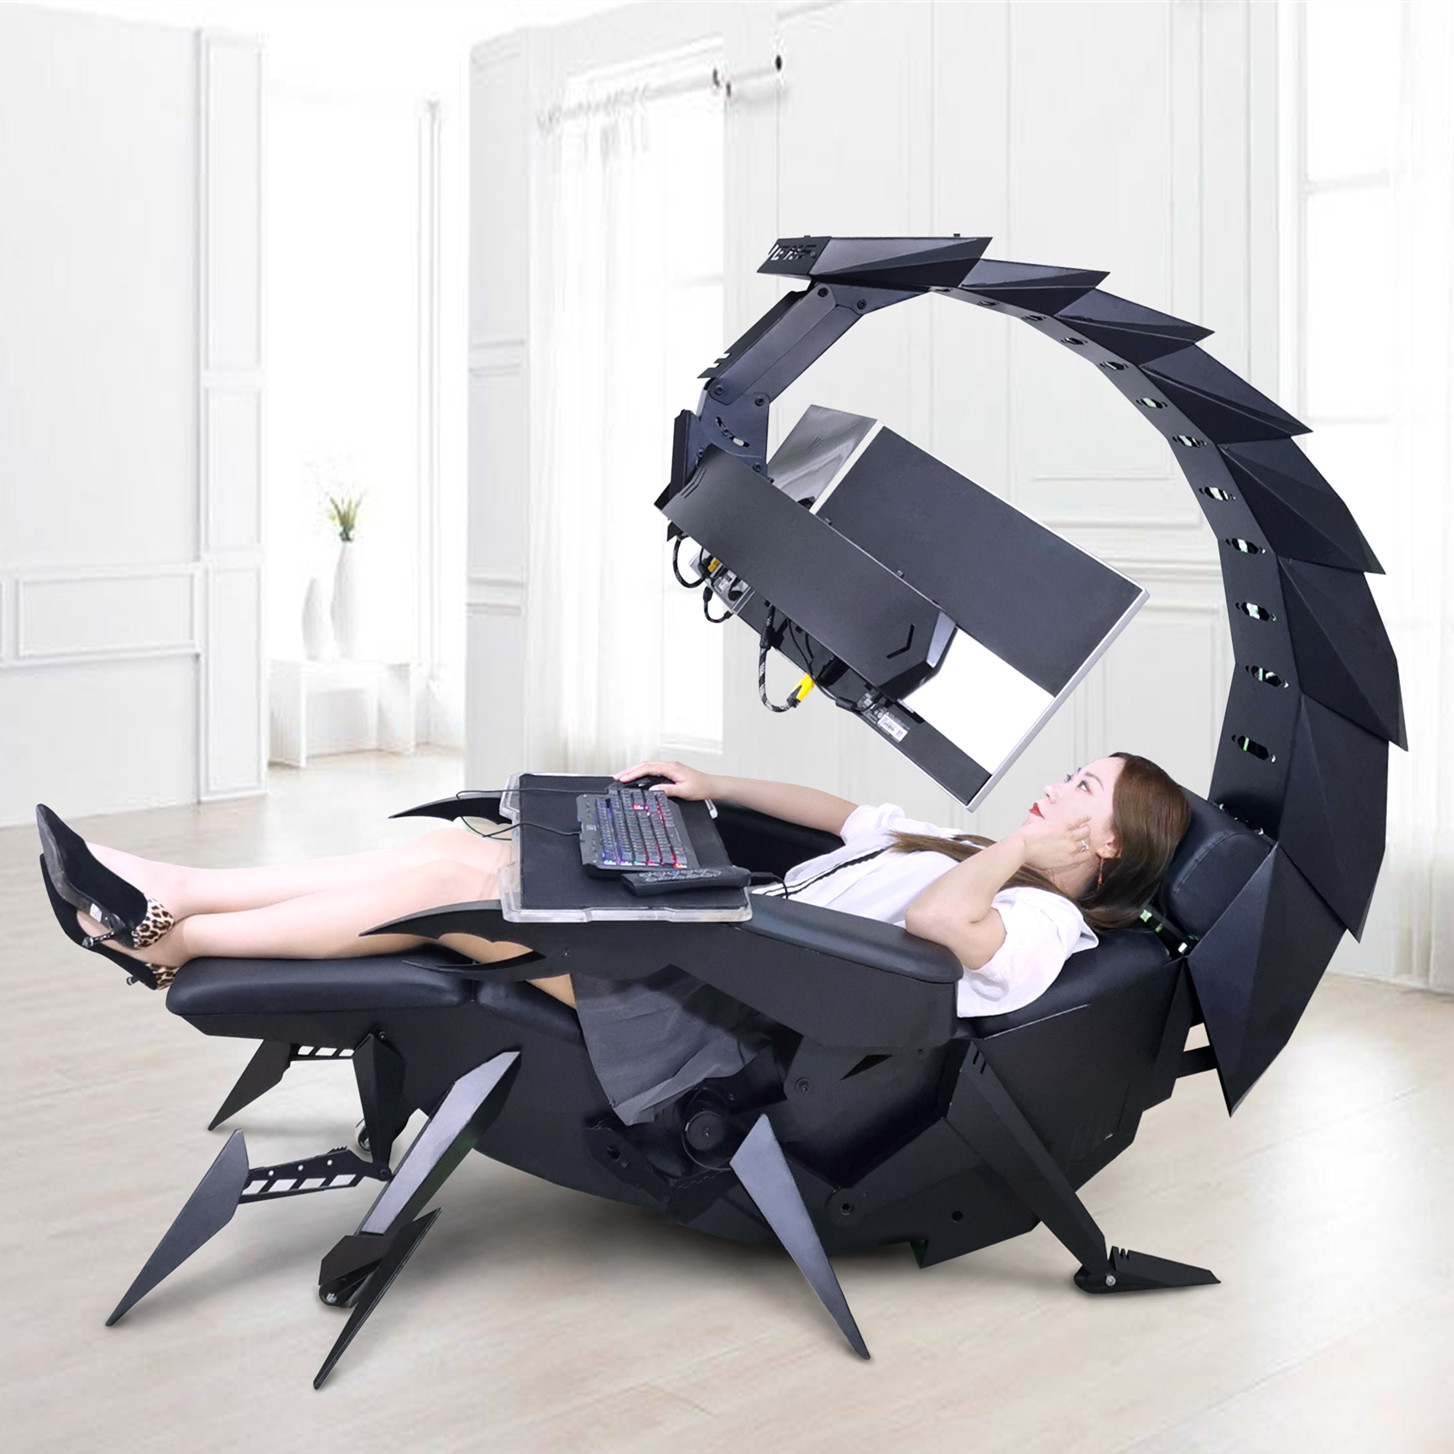 CLUVENS SK Scorpion King chair cockpit support upto 5 monitors electrical recline zero gravity super cool design